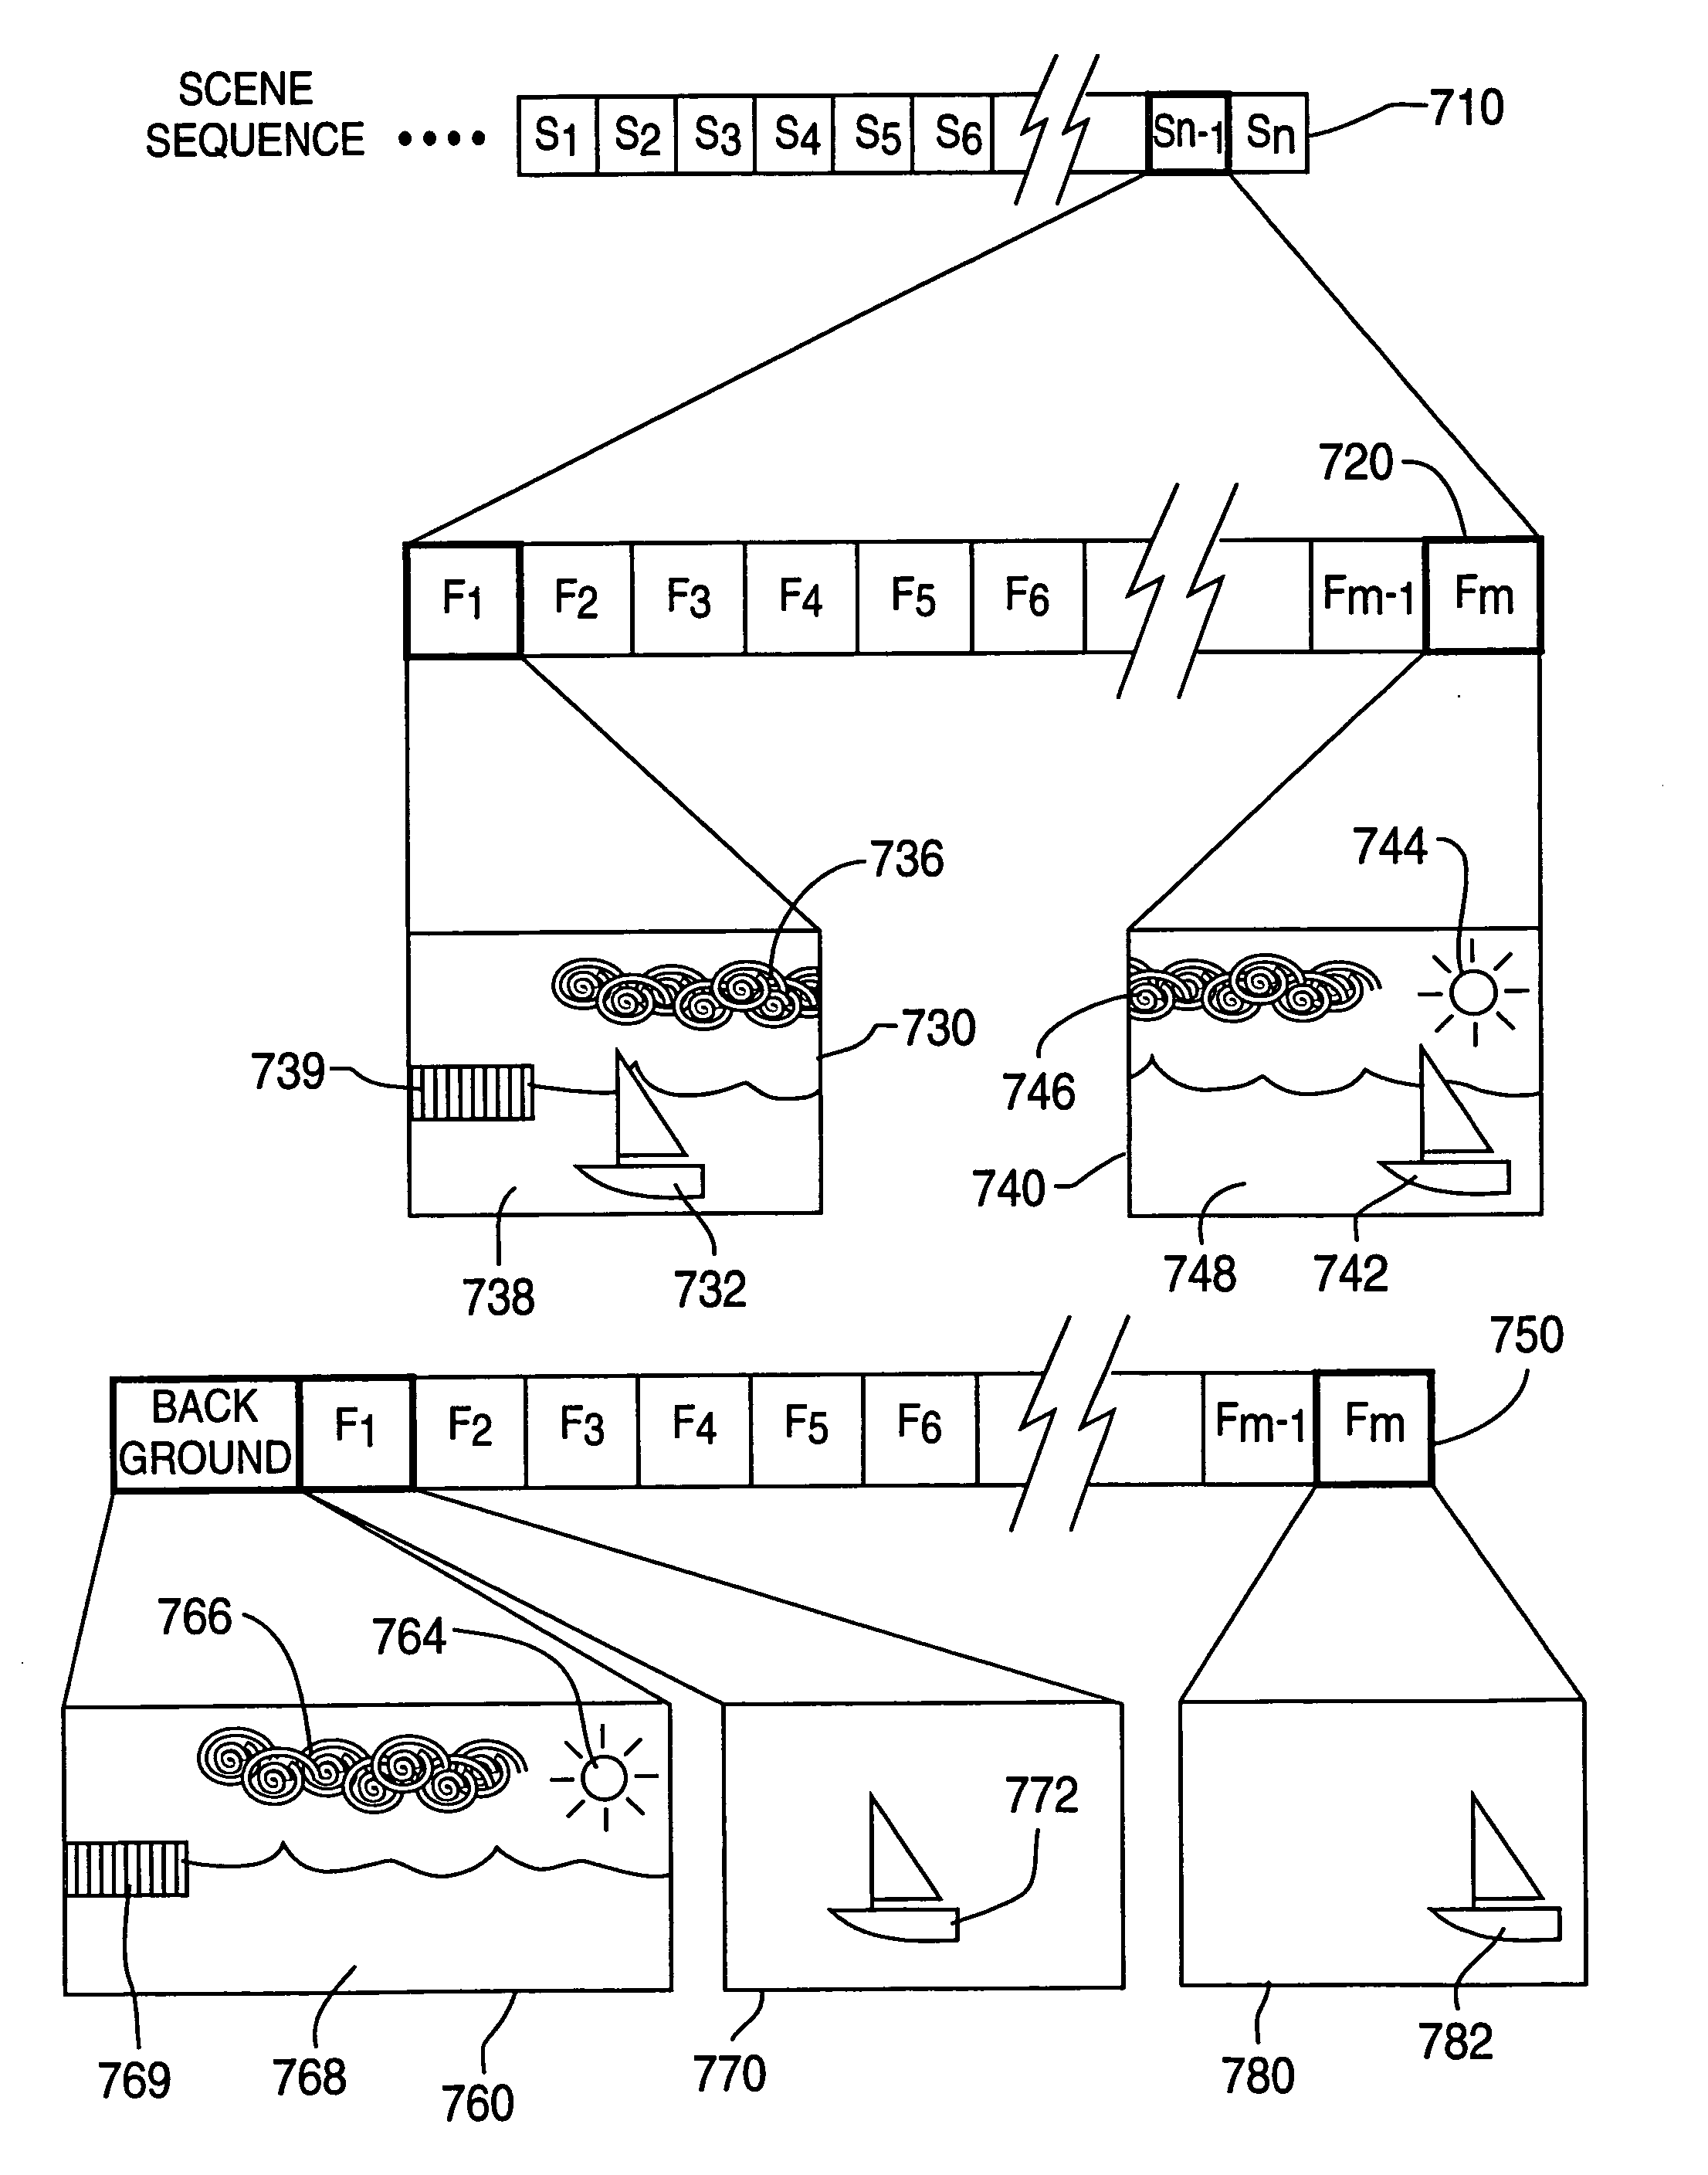 Method and apparatus for efficiently representing storing and accessing video information